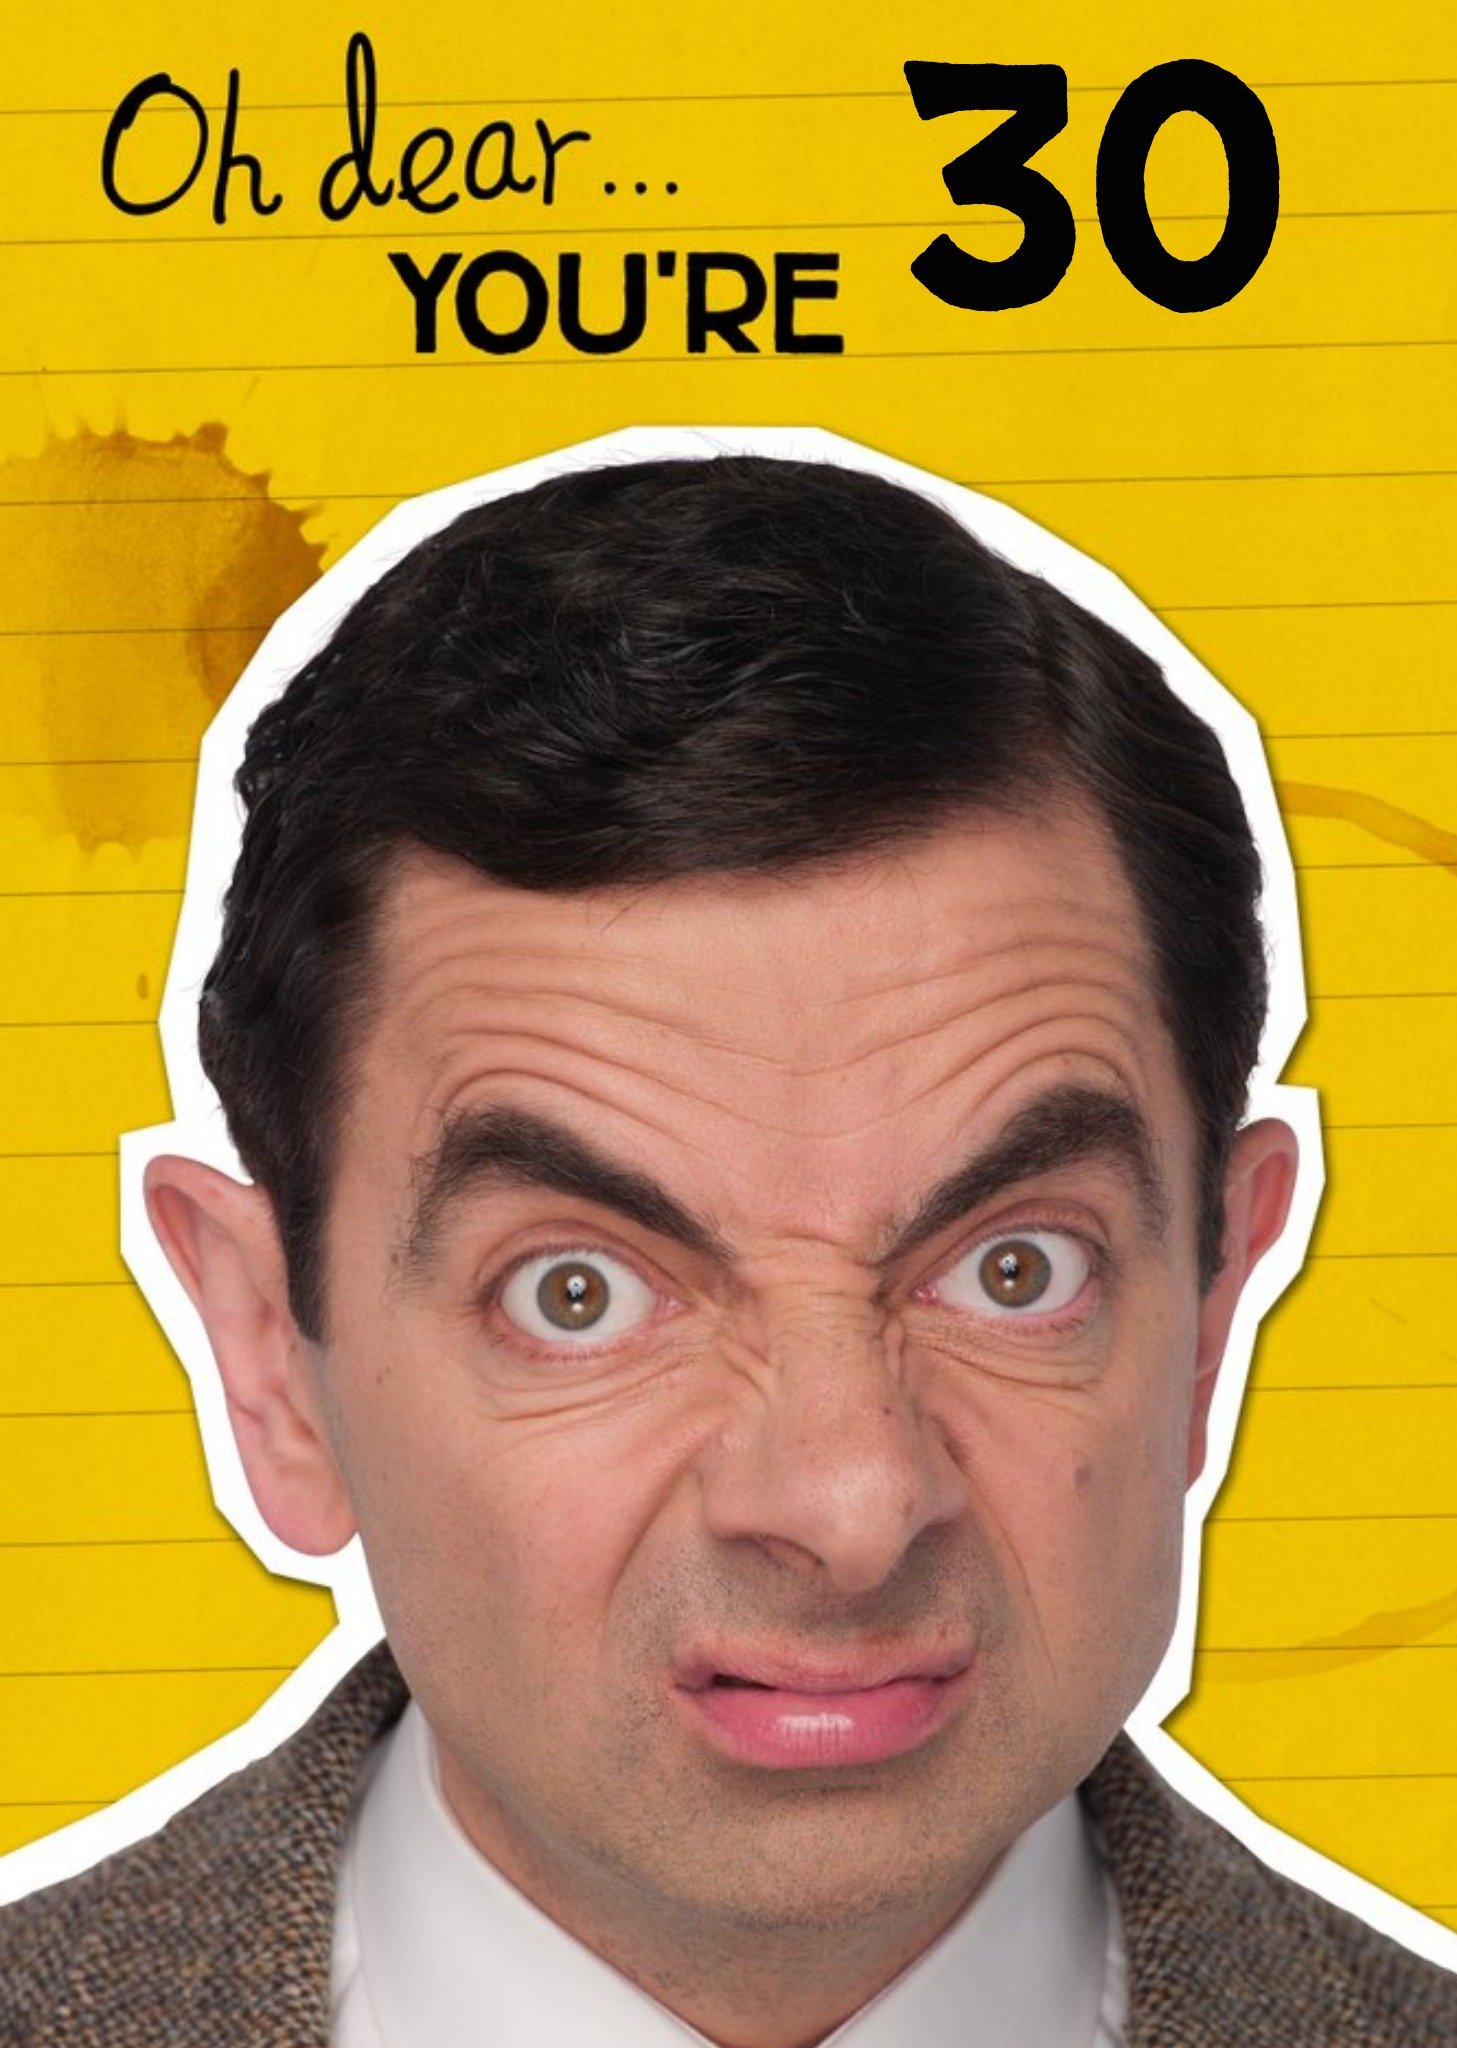 Moonpig Funny Mr Bean Oh Dear You're 30 Birthday Card, Large